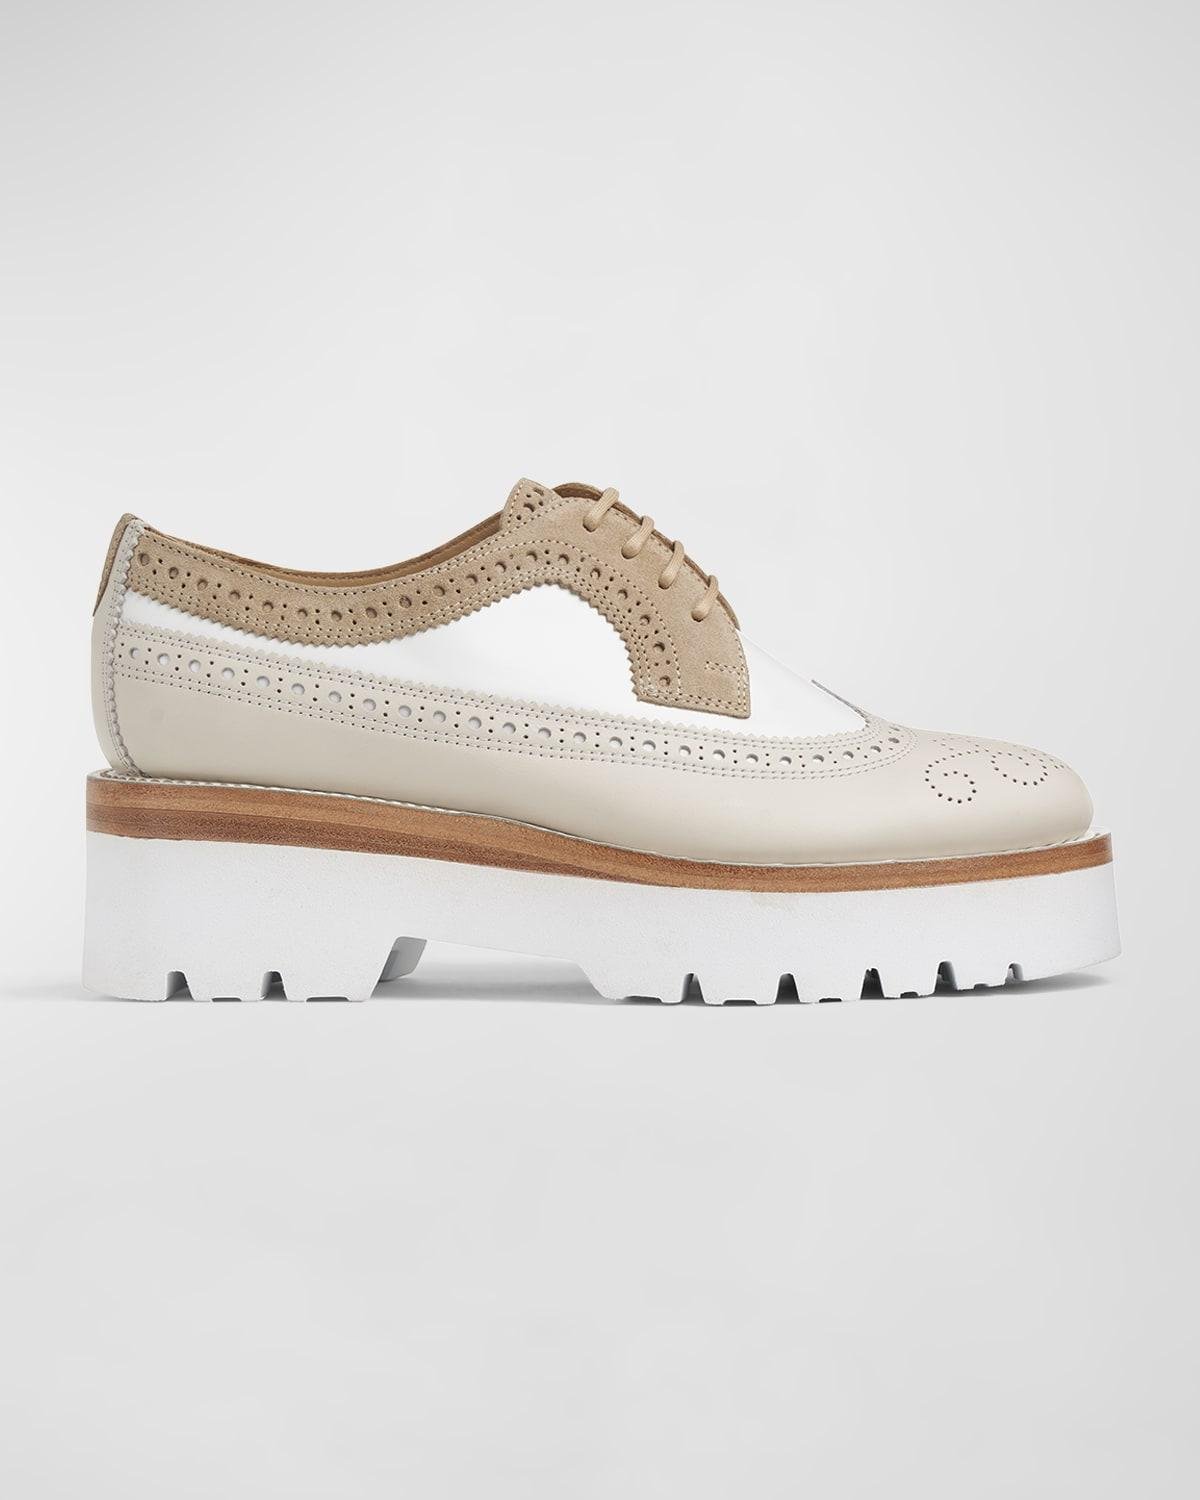 Miss Lucy Wing-Tip Platform Oxfords by THE OFFICE OF ANGELA SCOTT